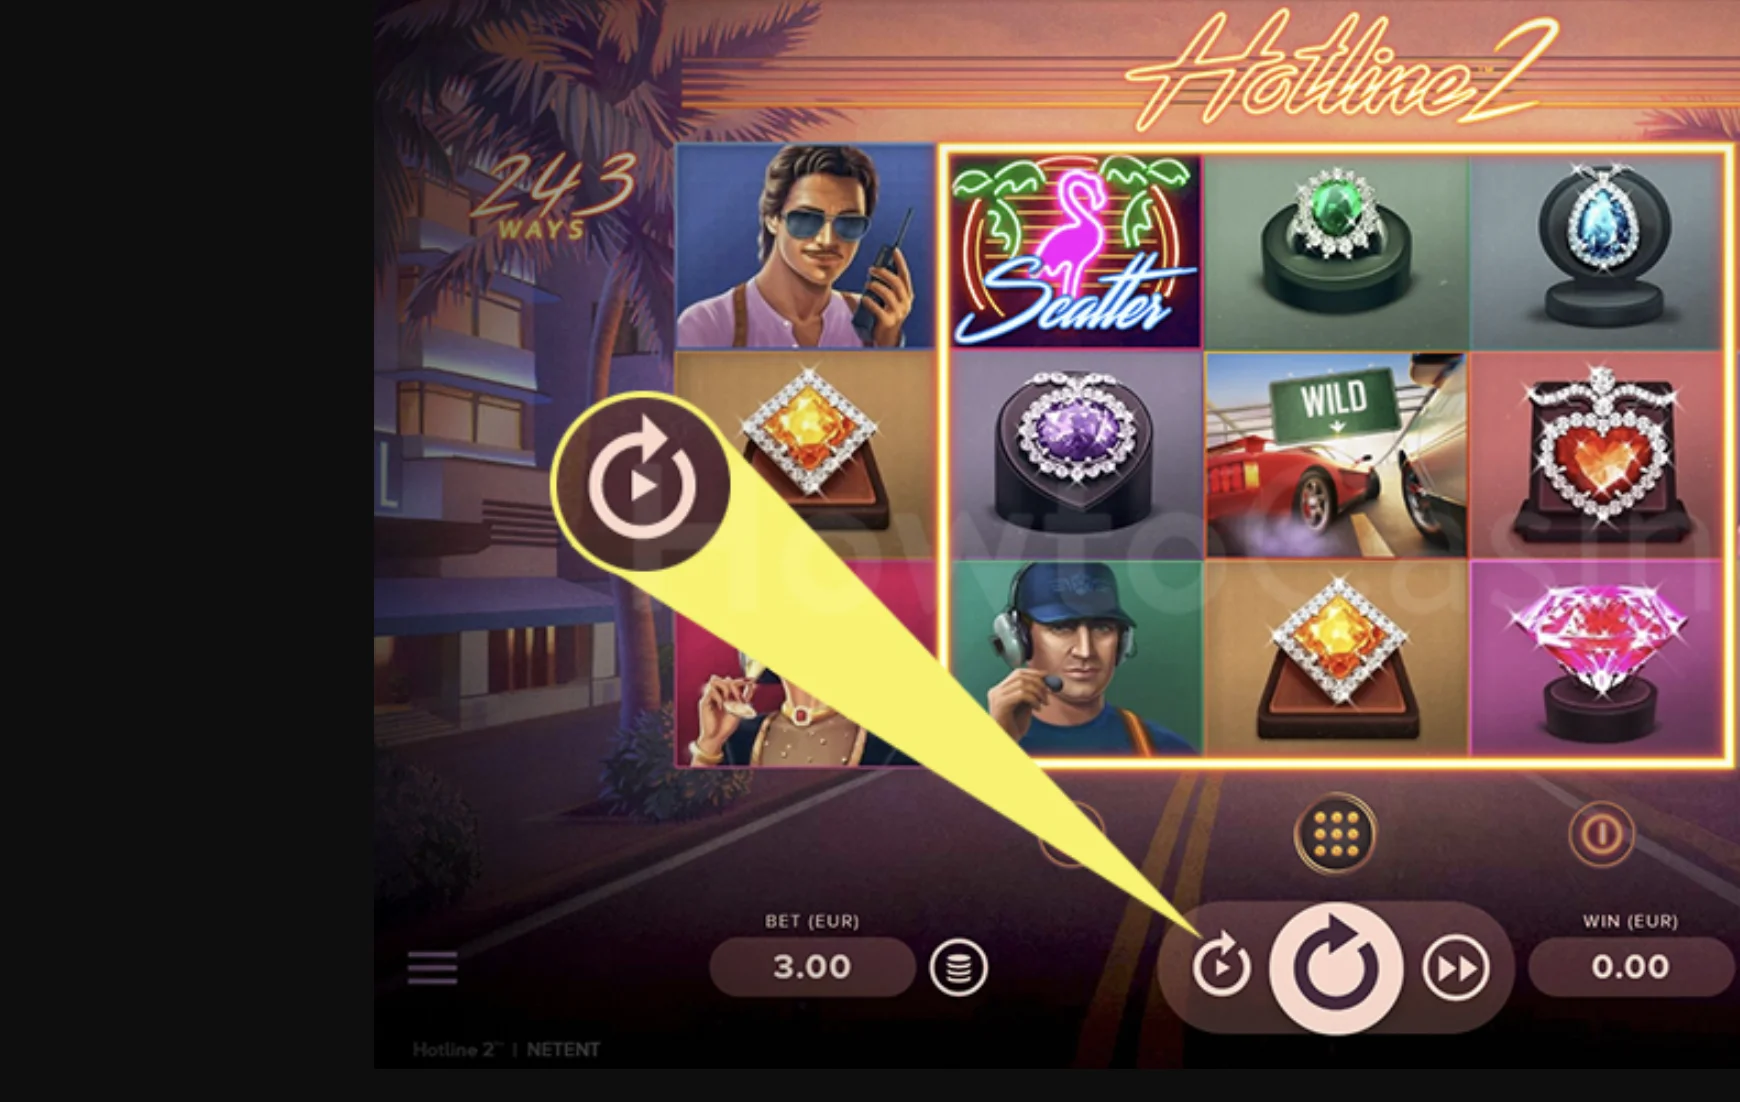 Autoplay in online casinos - curse or blessing?